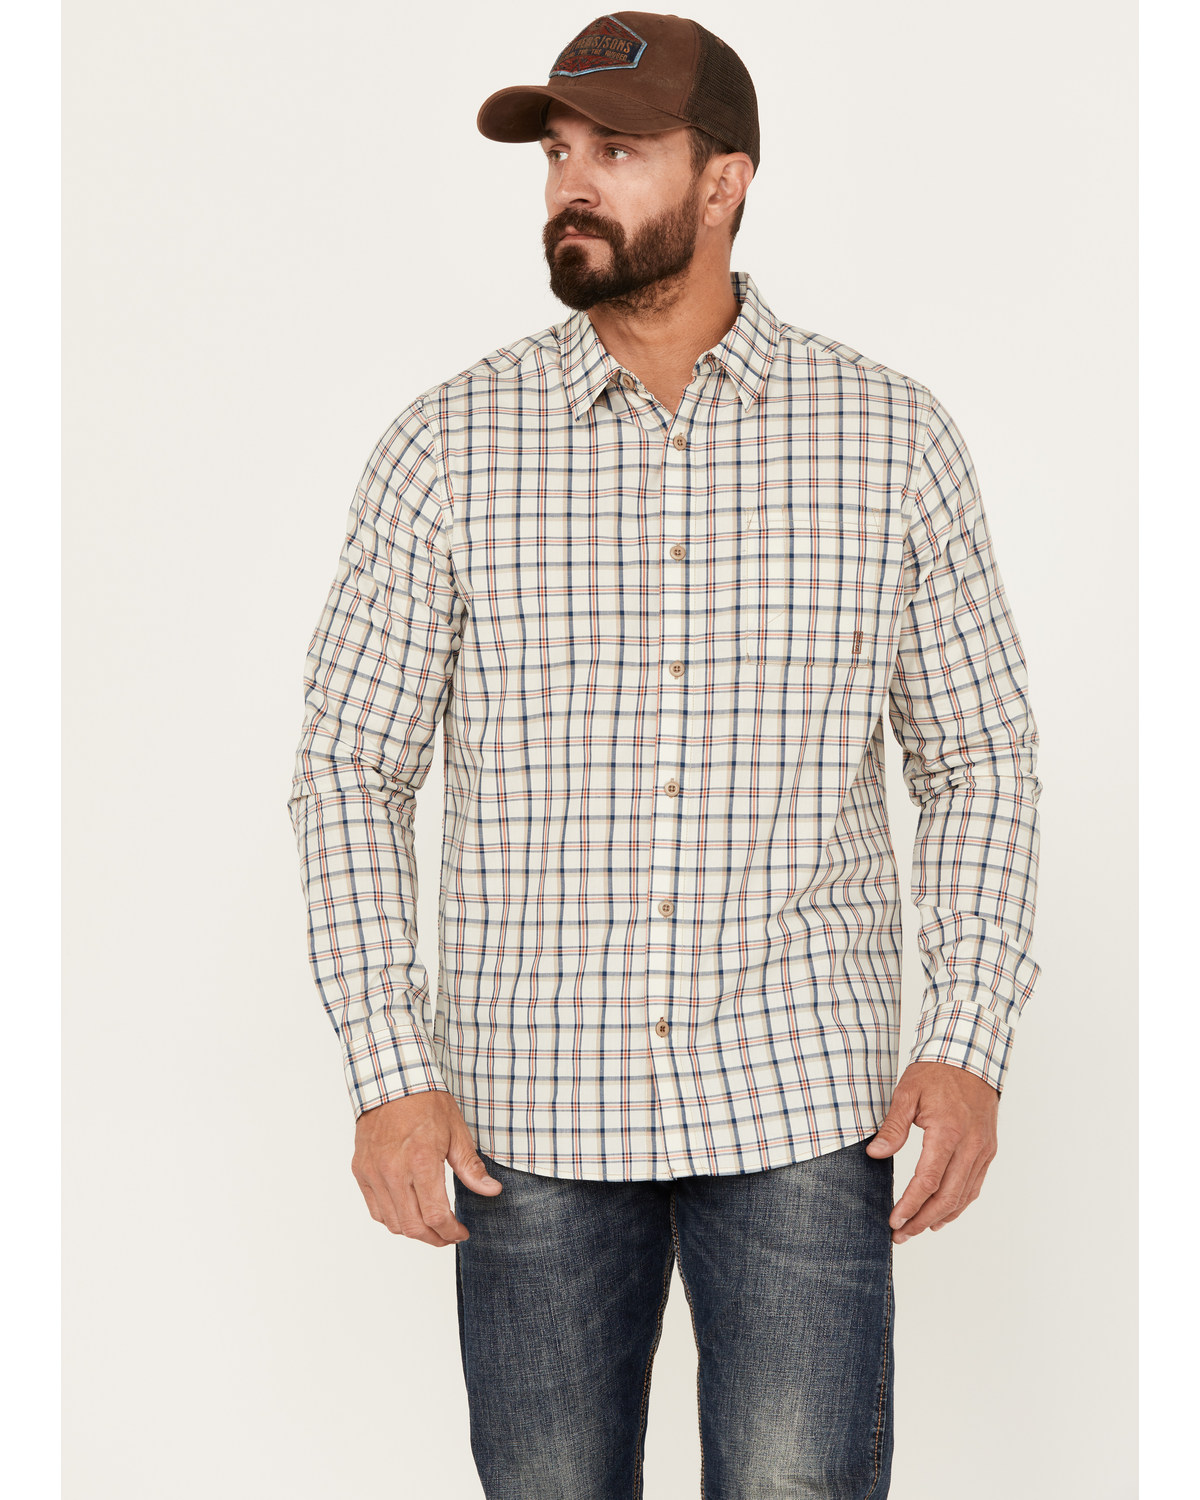 Brothers and Sons Men's Plaid Long Sleeve Button Down Western Shirt